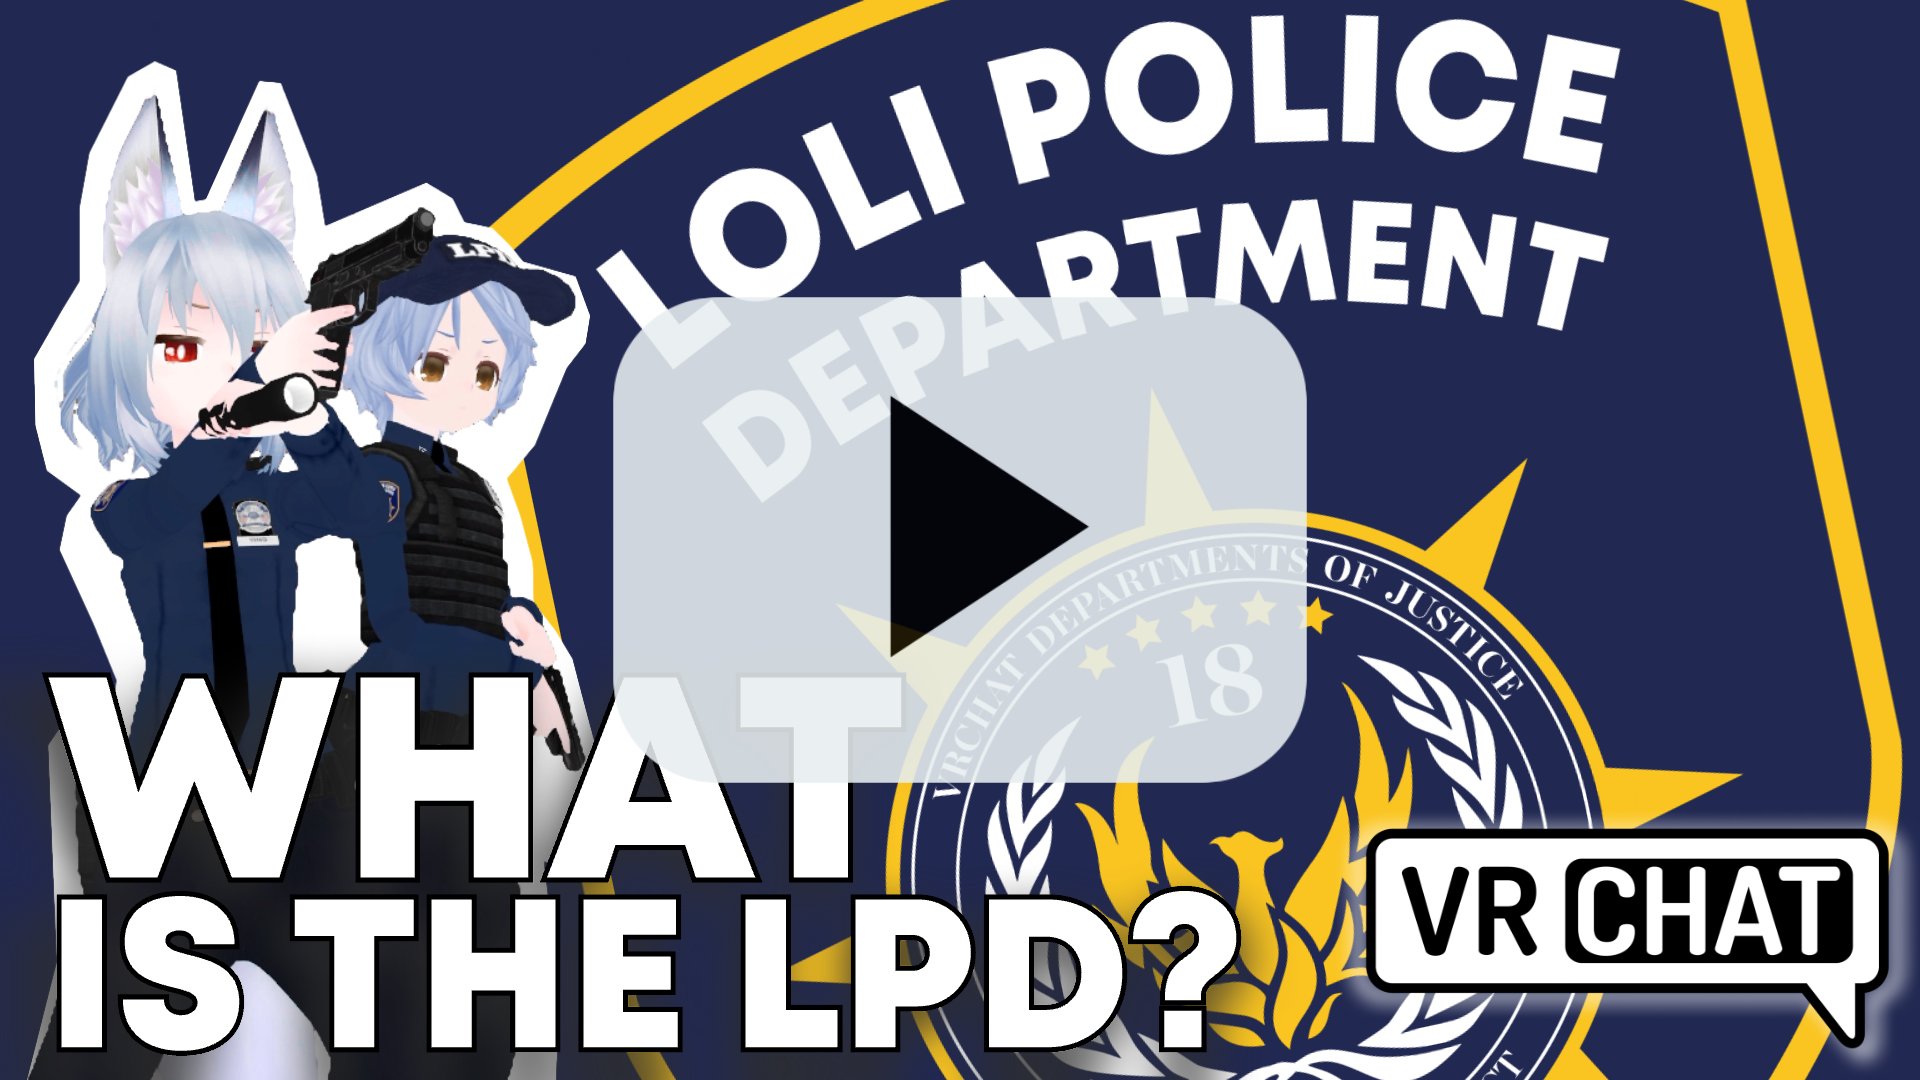 Loli Police Department on Twitter: "Wondering what the LPD is up to in  @VRChat? We made this video to explain who we are and what we do. ▶️Watch  here: https://t.co/01iHD1HDIi #VRChat #VR #